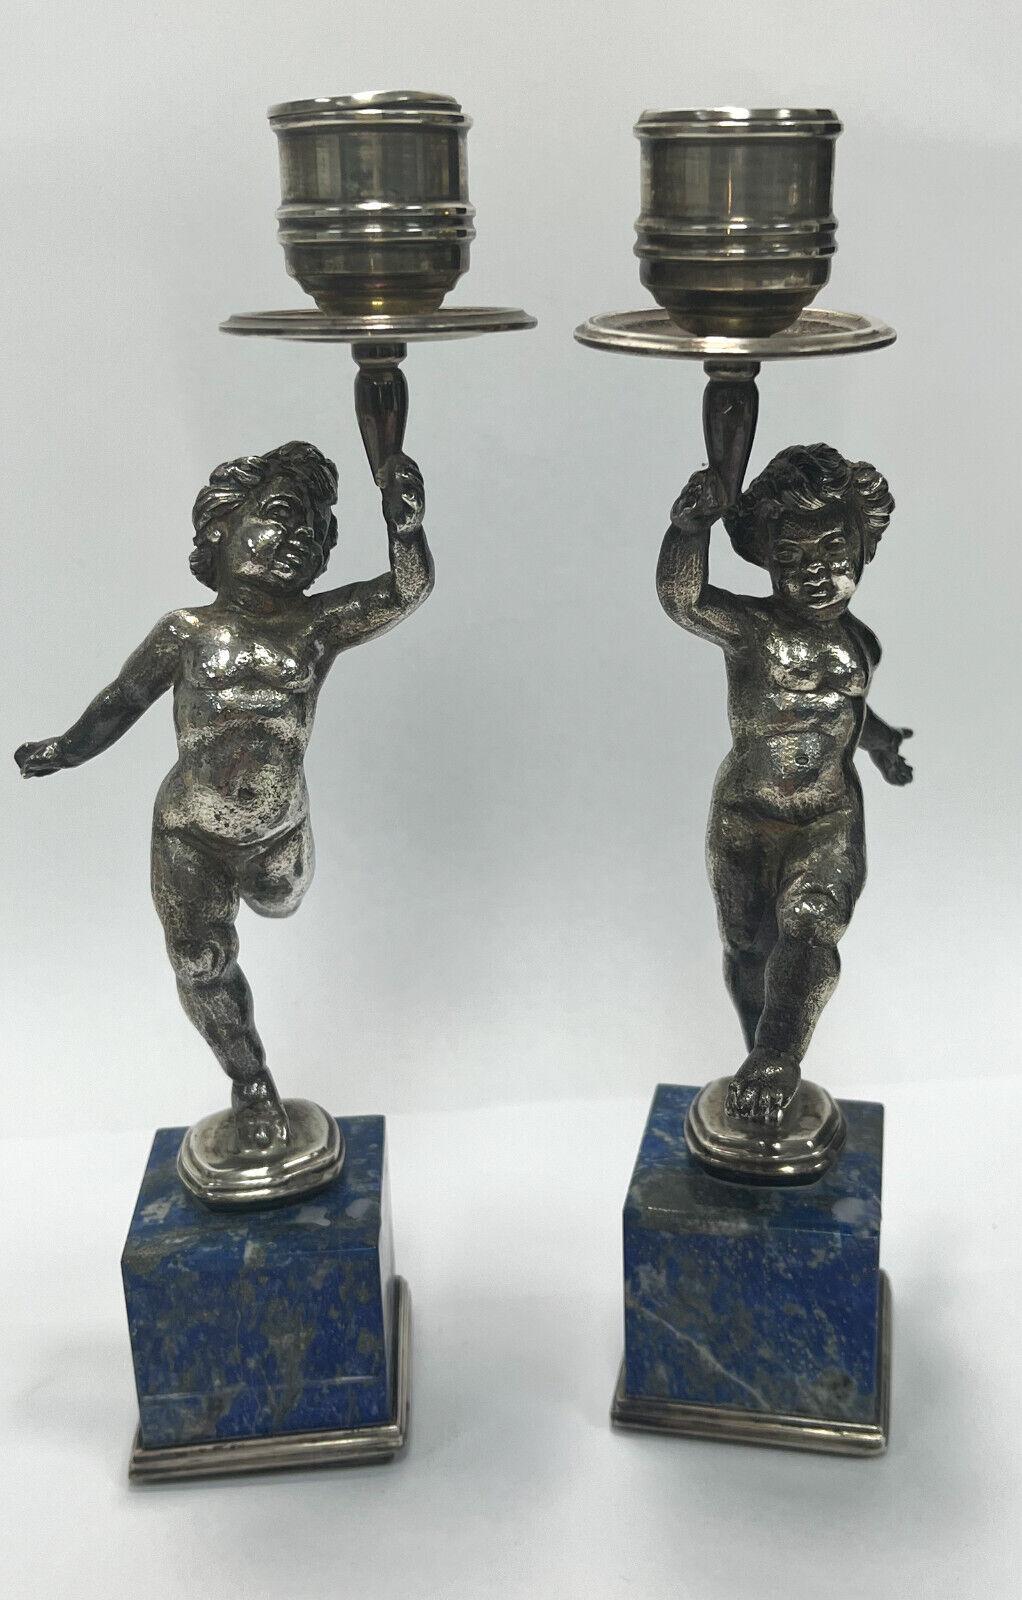 Pair Buccellati Italian sterling silver and Lapis Lazuli veneered candlesticks, circa 1950. Figural cherubs to the stem holding up the bobeches in a dancing manner. Venered Lapis Lazuli panels to the bases. Buccellati Italian sterling silver marks